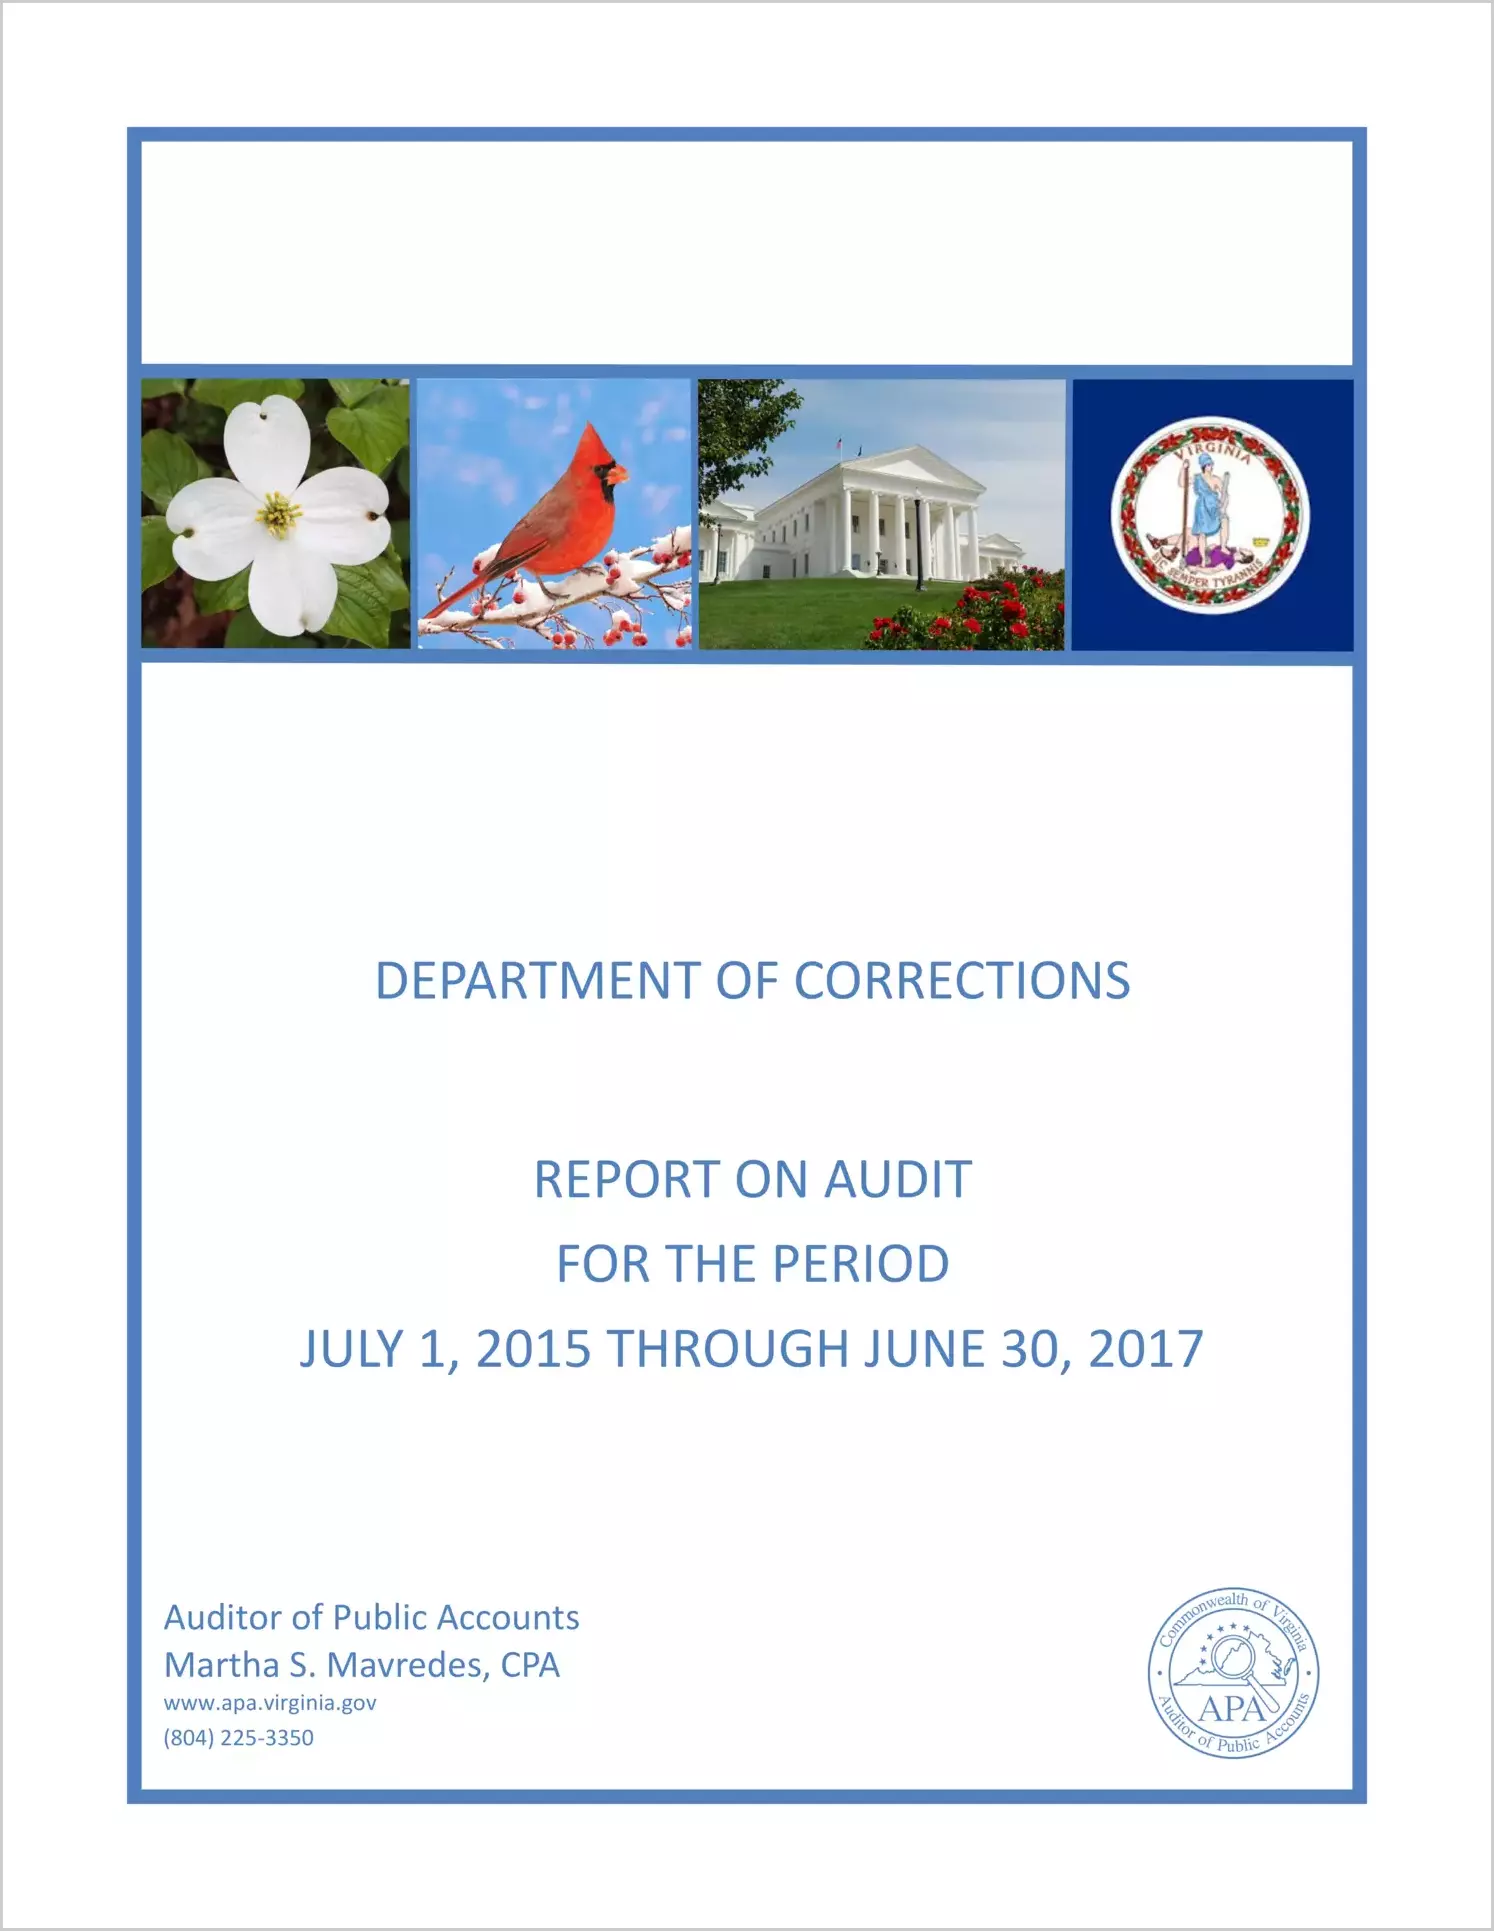 Department of Corrections for the period July 1, 2015 through June 30, 2017